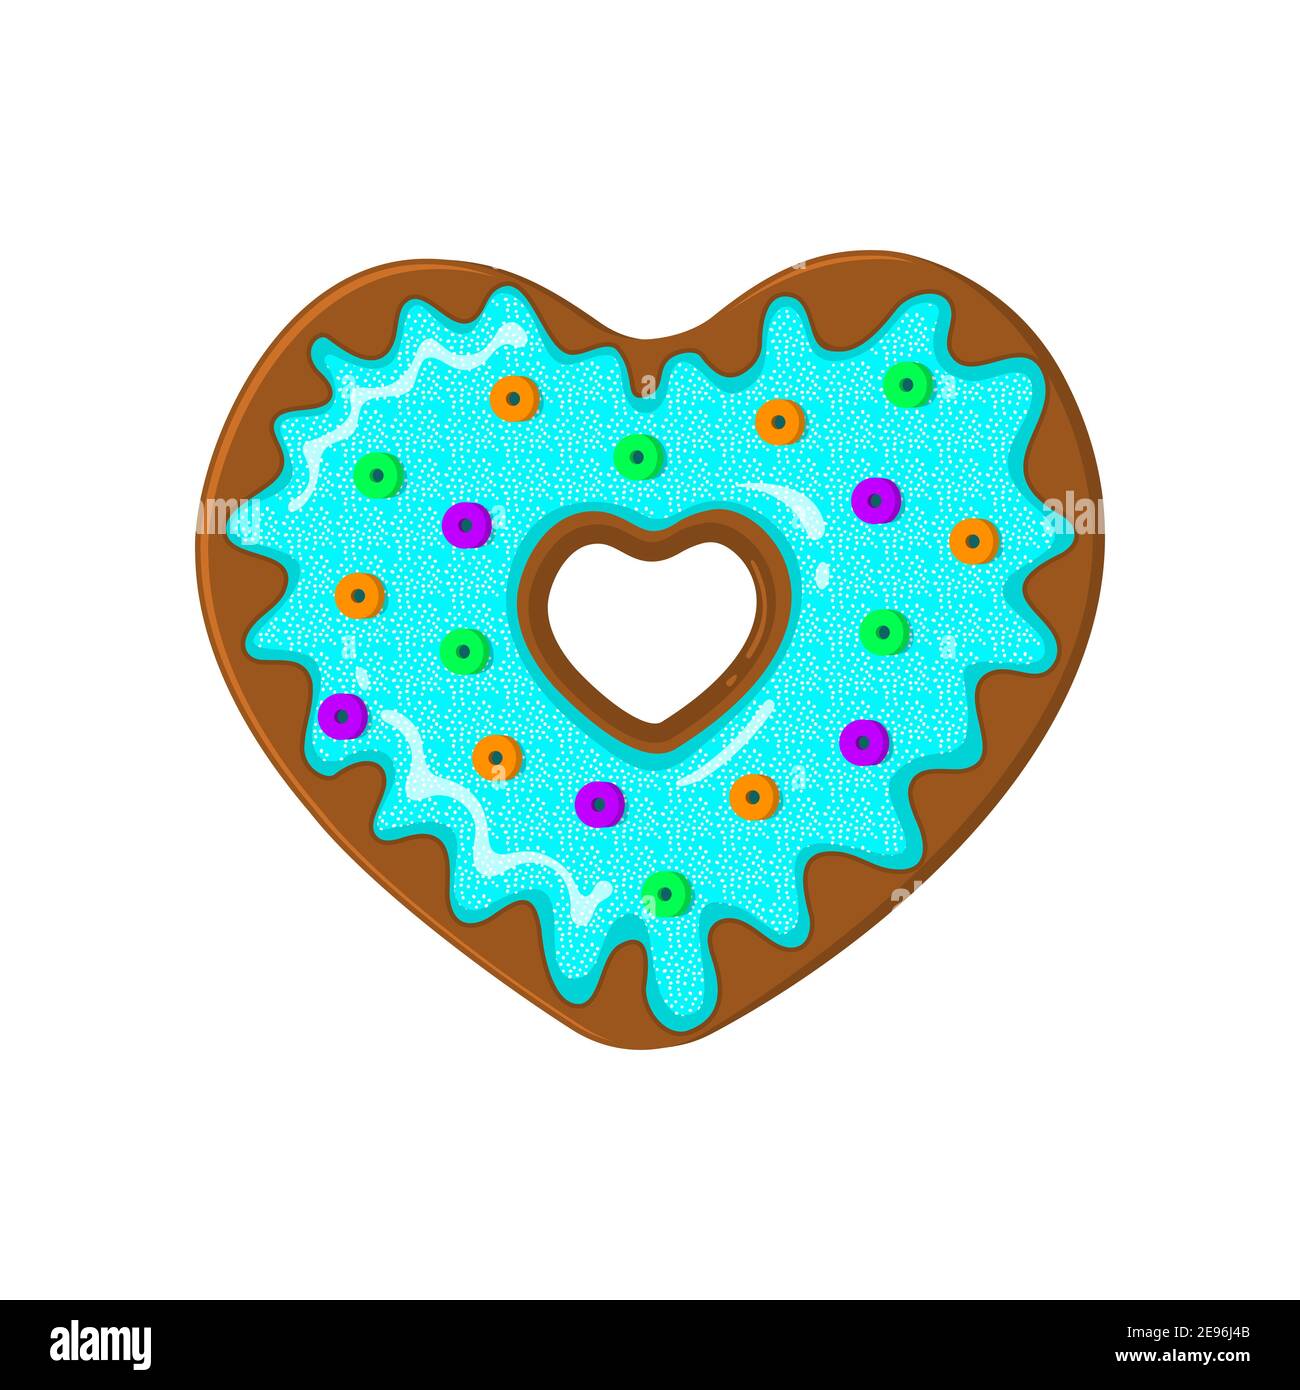 Heart shaped doughnut isolated on white background. Donut decorated with blue glaze, powdered sugar and mini candies. Sweet dessert for Valentines day. Vector cartoon illustration. Stock Vector